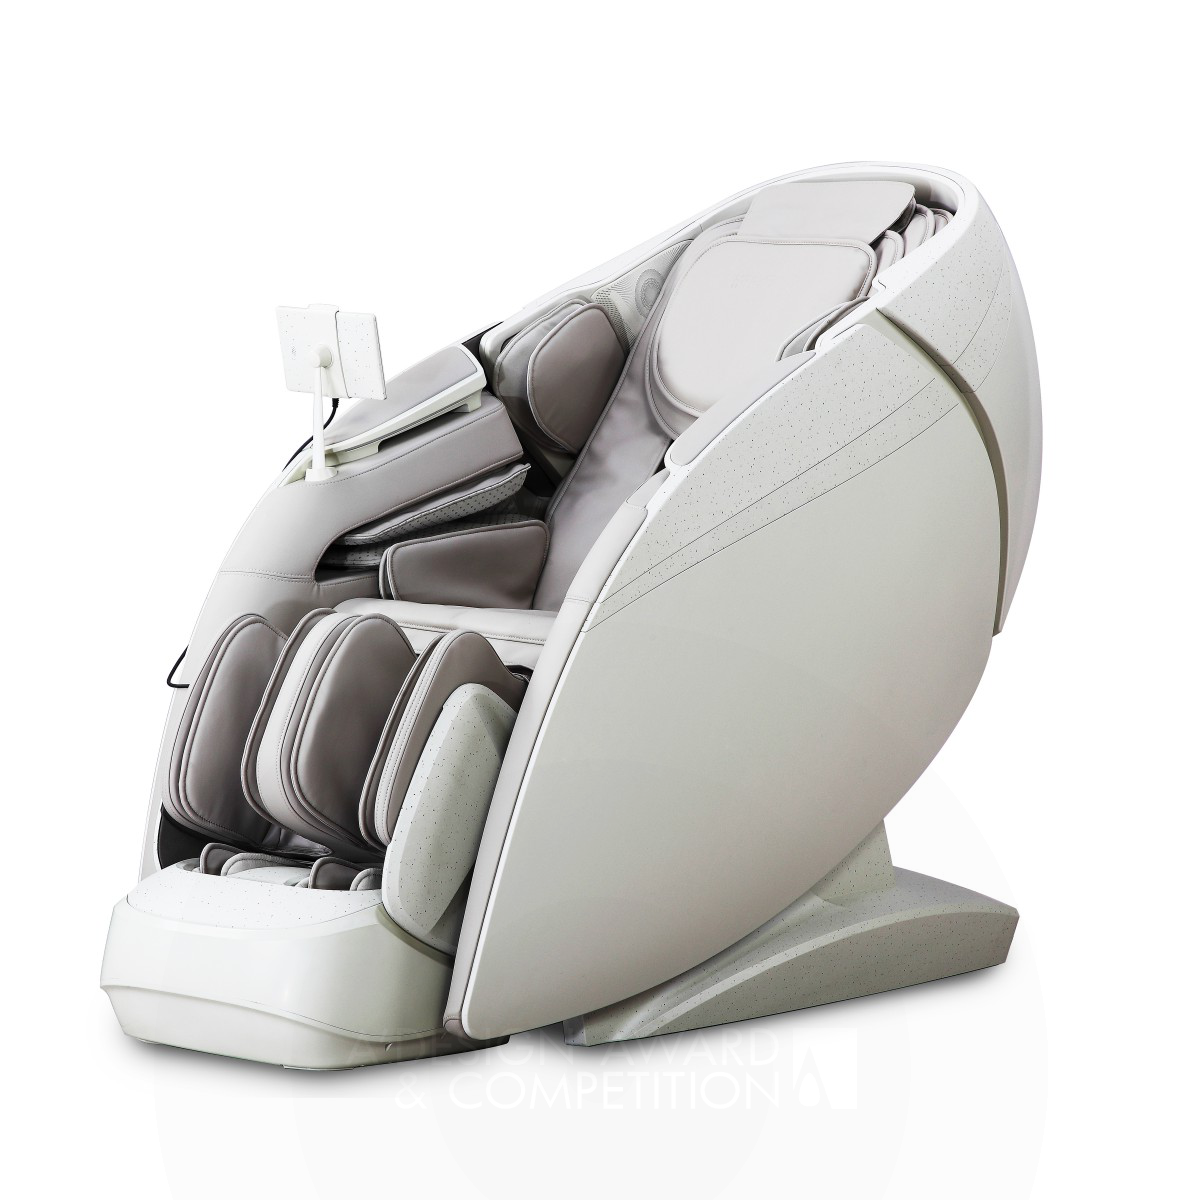 iRest V8 Fuxinhao Massage Chair by ZJ Haozhonghao Health Product Co., Ltd Silver Design Quality and Innovation Award Winner 2023 